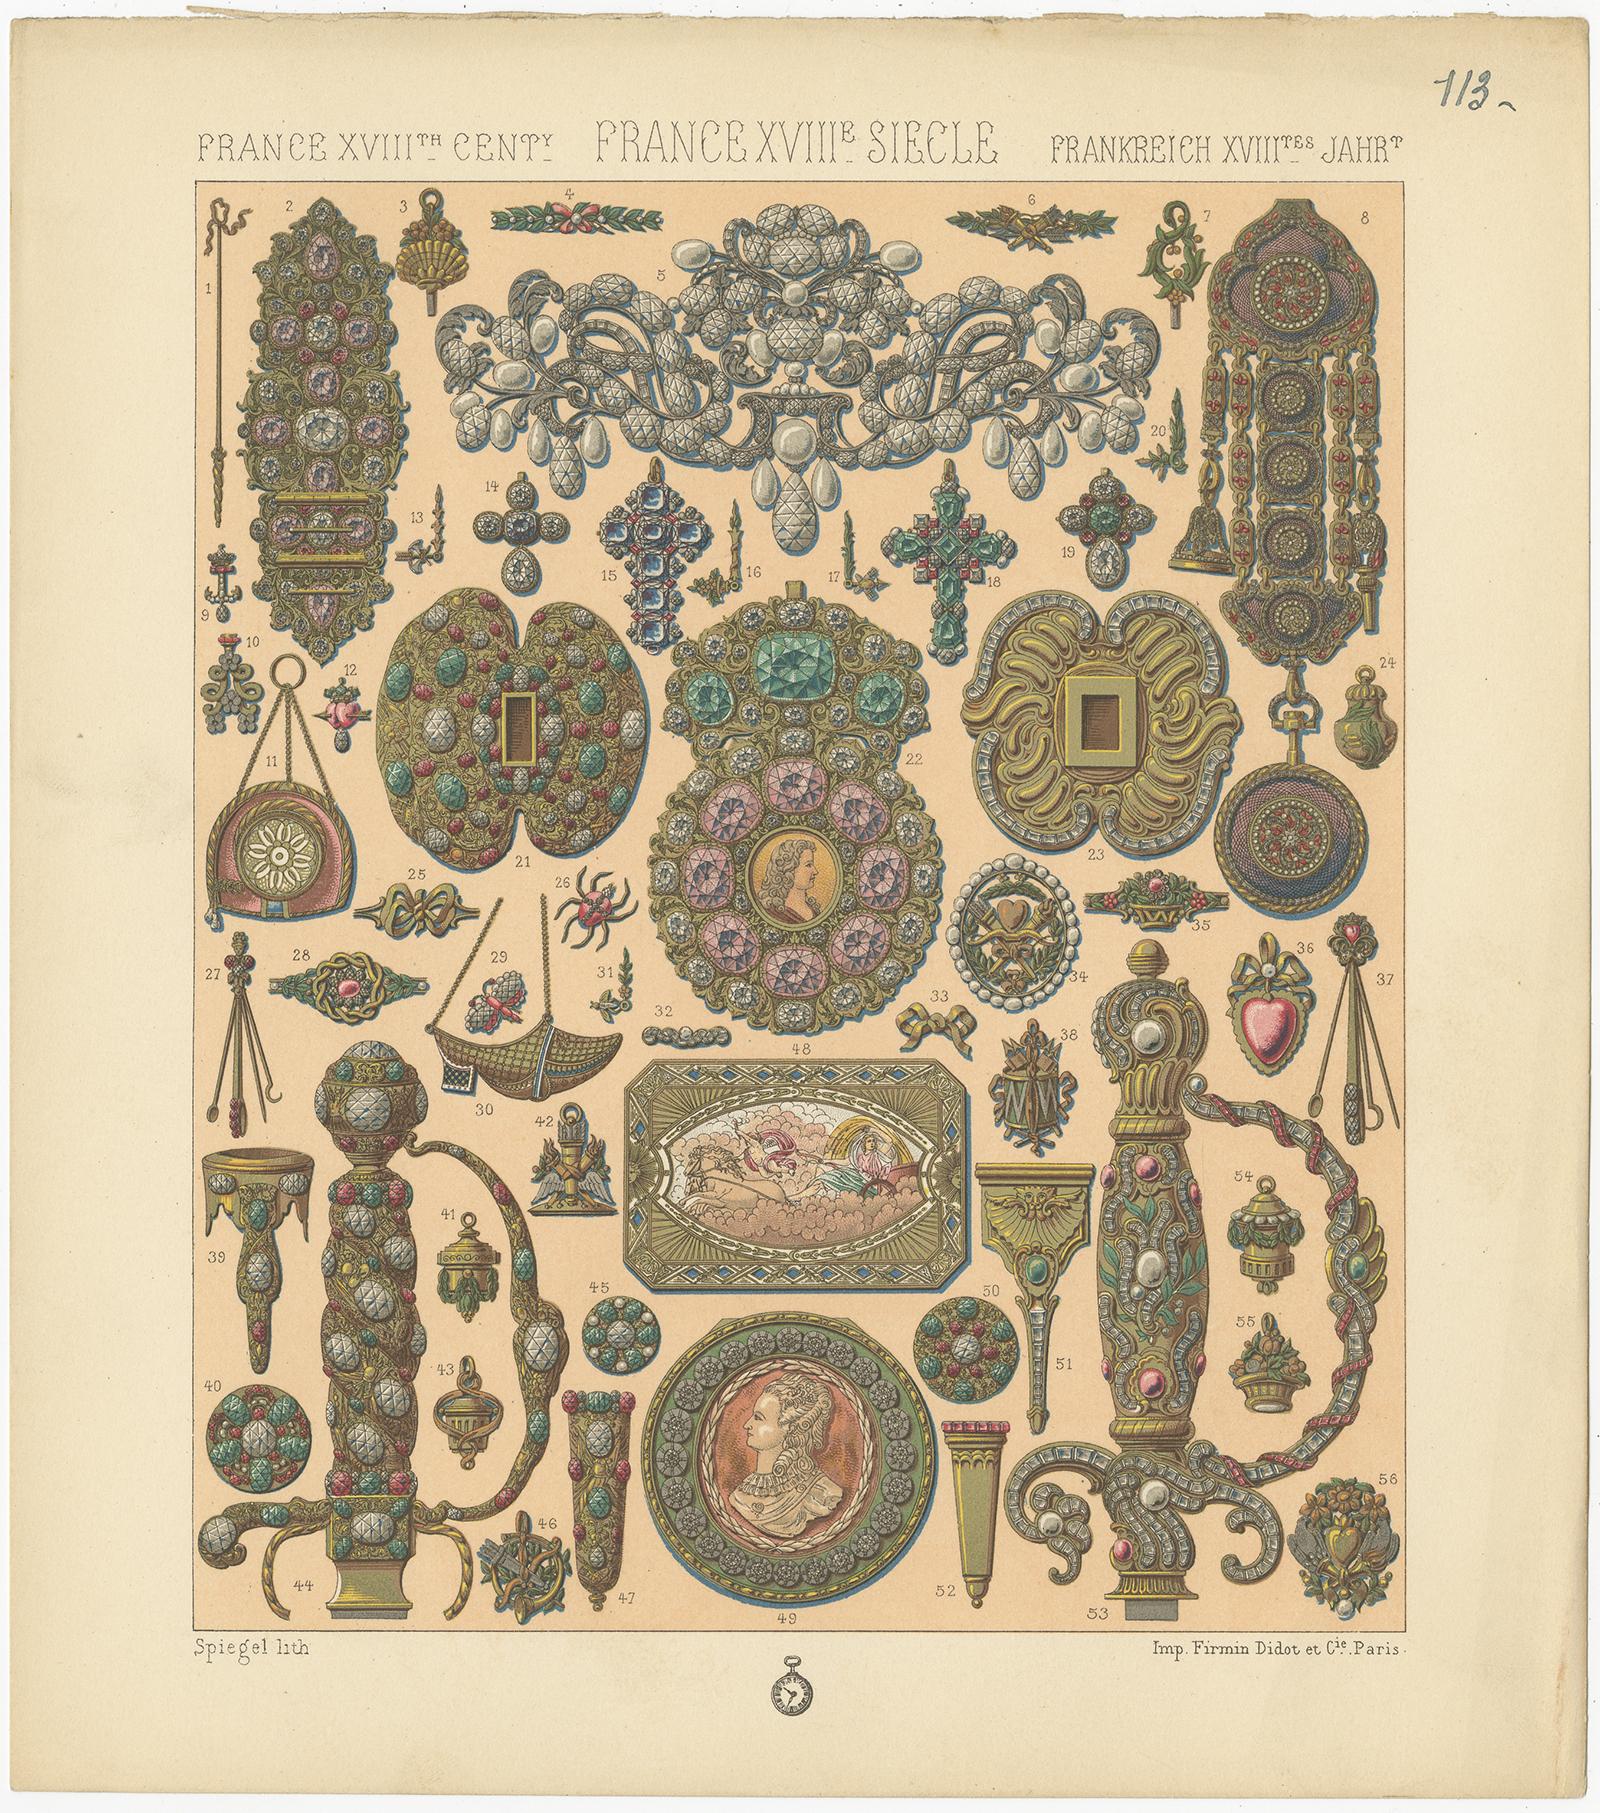 Antique print titled 'France XVIIIth Cent - France XVIIIe, Siecle - Frankreich XVIIItes Jahr'. Chromolithograph of French 18th century decorative objects. This print originates from 'Le Costume Historique' by M.A. Racinet. Published circa